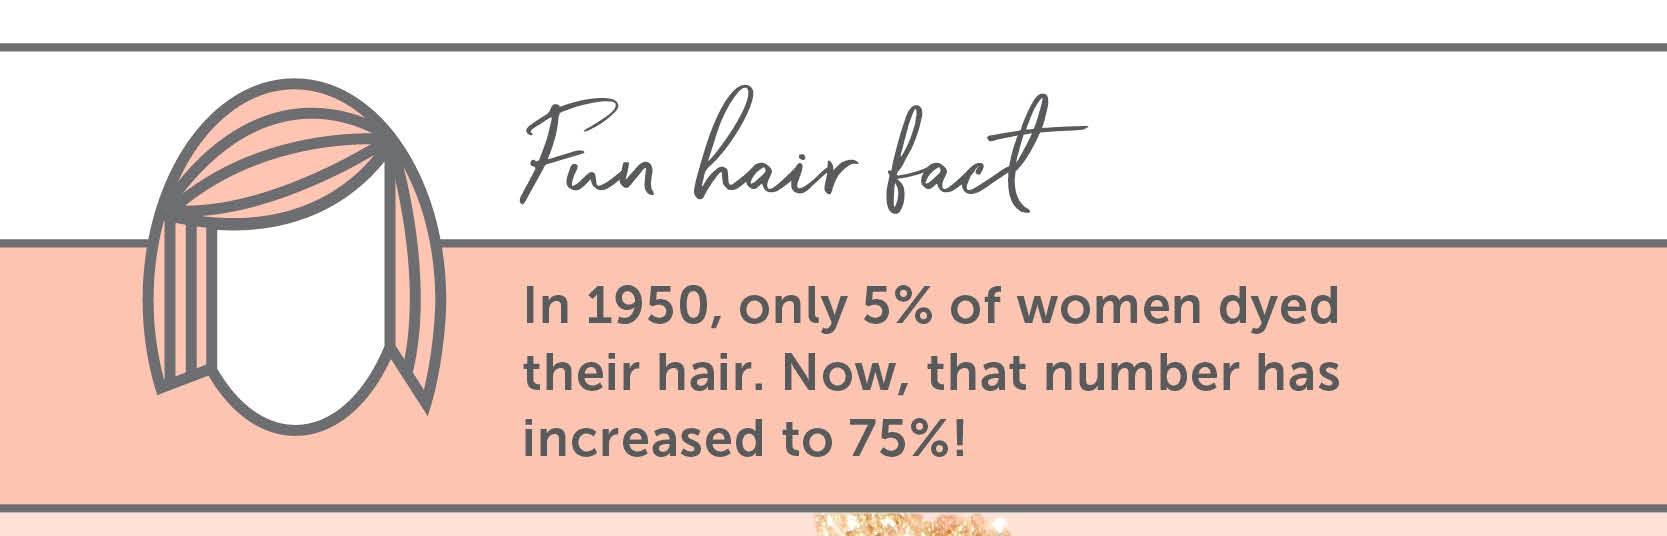 Fun Hair Facts In 1950, only 5% of women dyed their hair. Now, that number has increased to 75%!